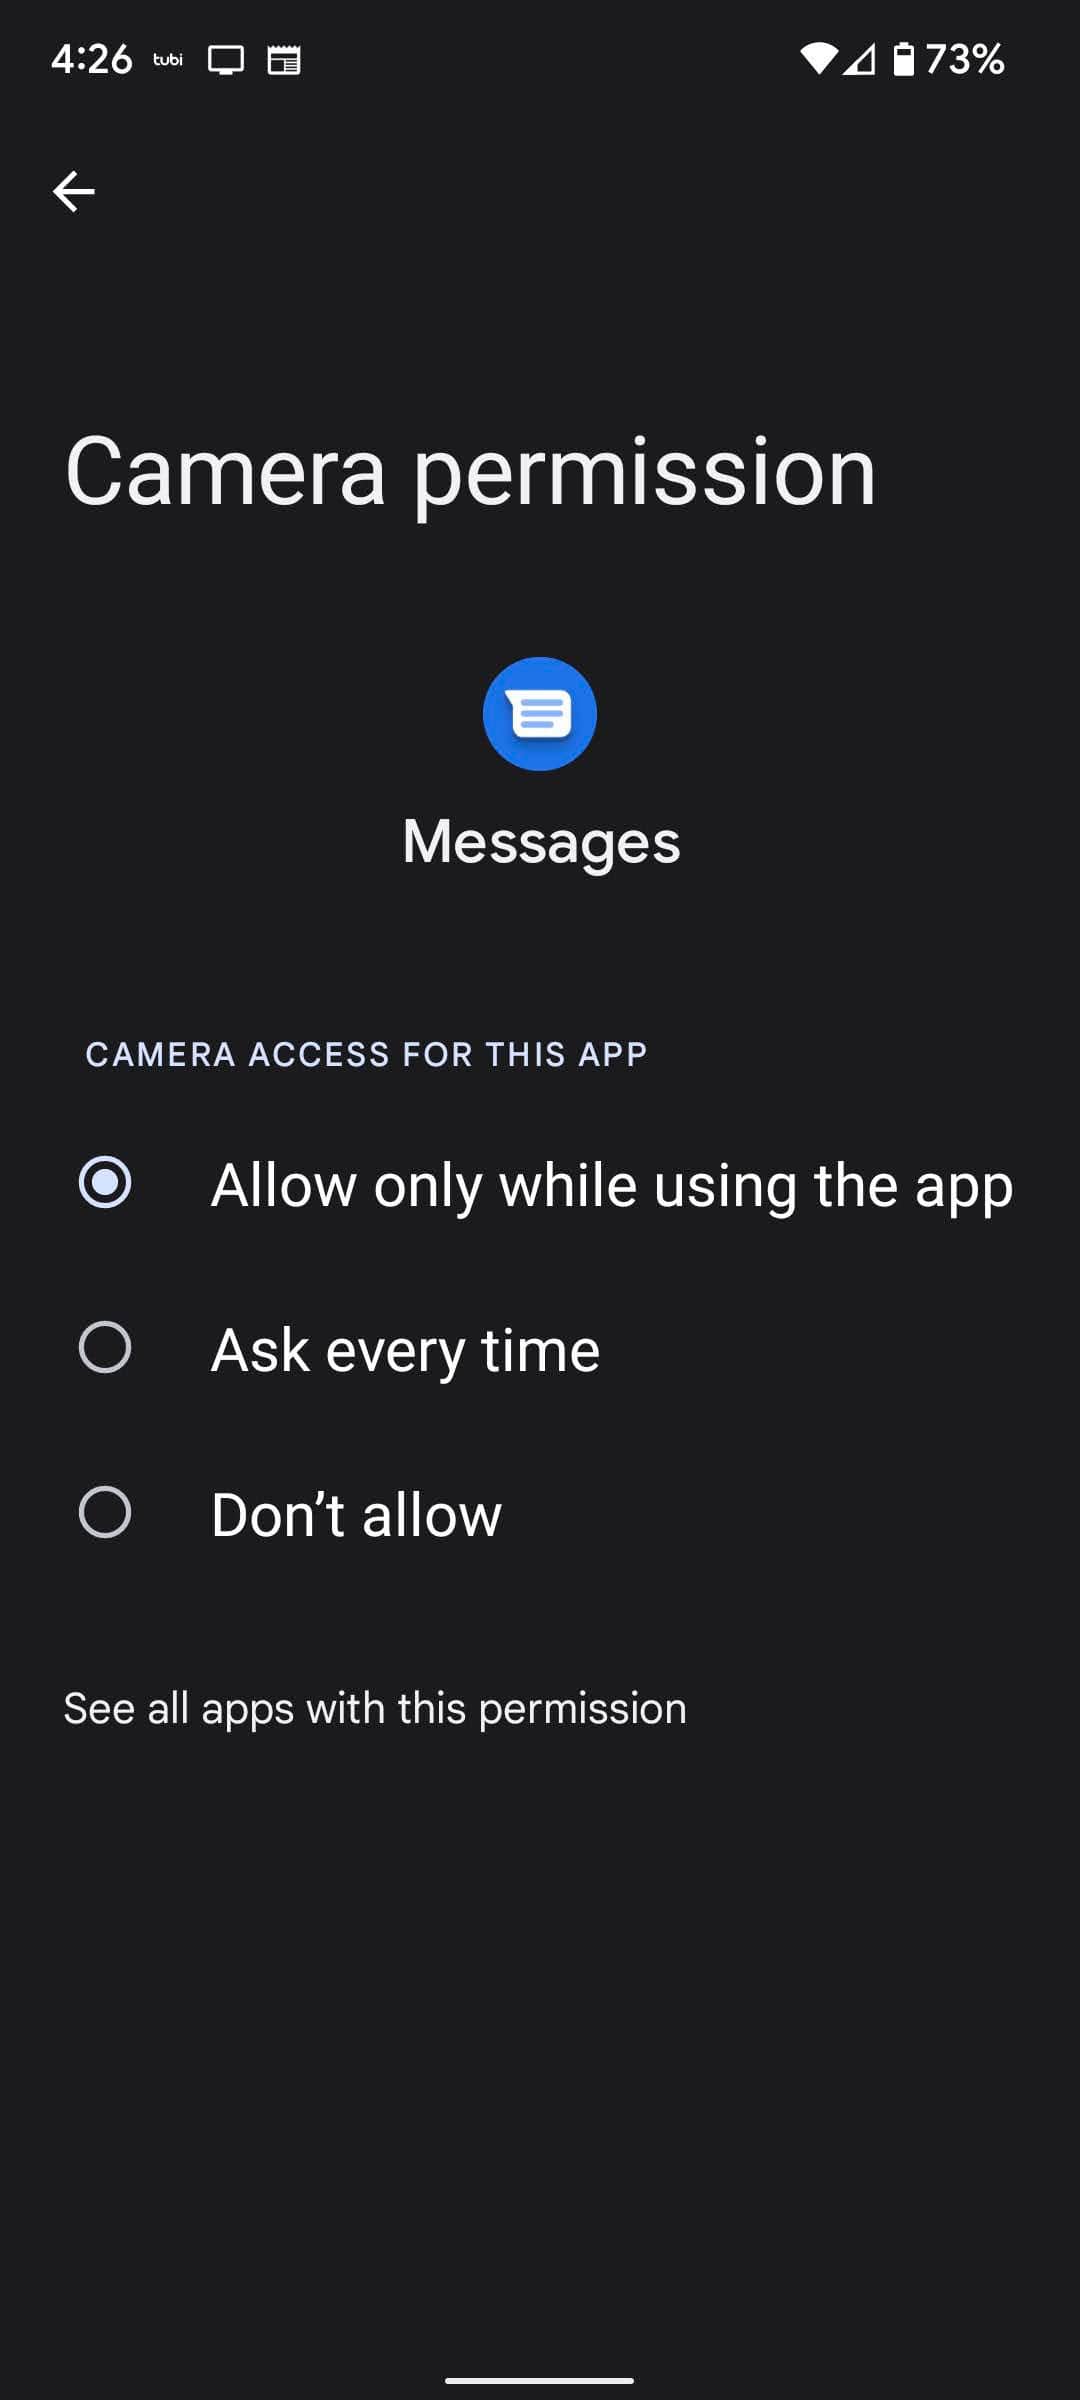 You can, if you want, deny Messages permission to use the camera.